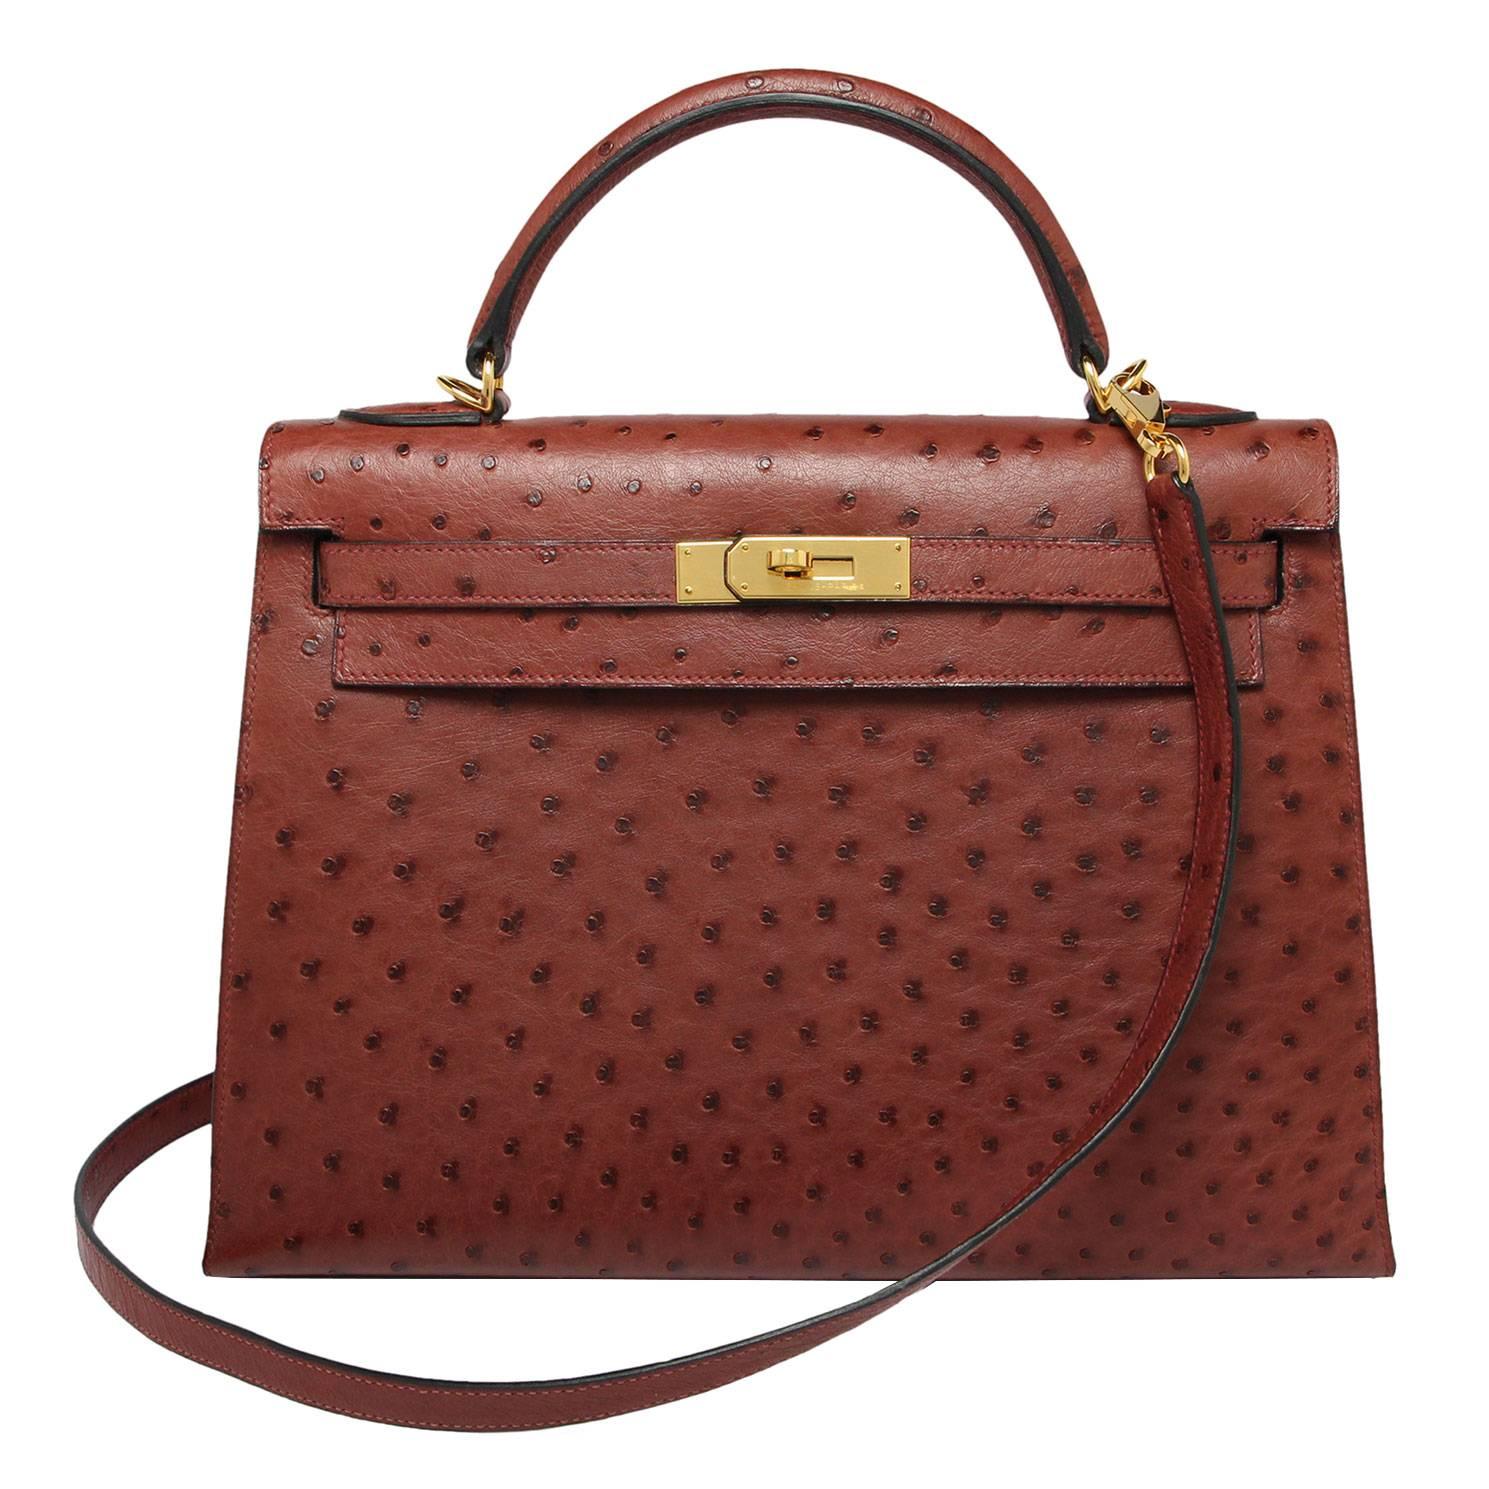 Hermes Kelly sellier 32cm rouge hermes
Ostrich 
Gold hardware 
Stamp NA but circa late 1990s
Comes with Hermes cloth bag, clochette, lock & keys

This is a stunning winter colour which is currently discontinued in ostrich skin.